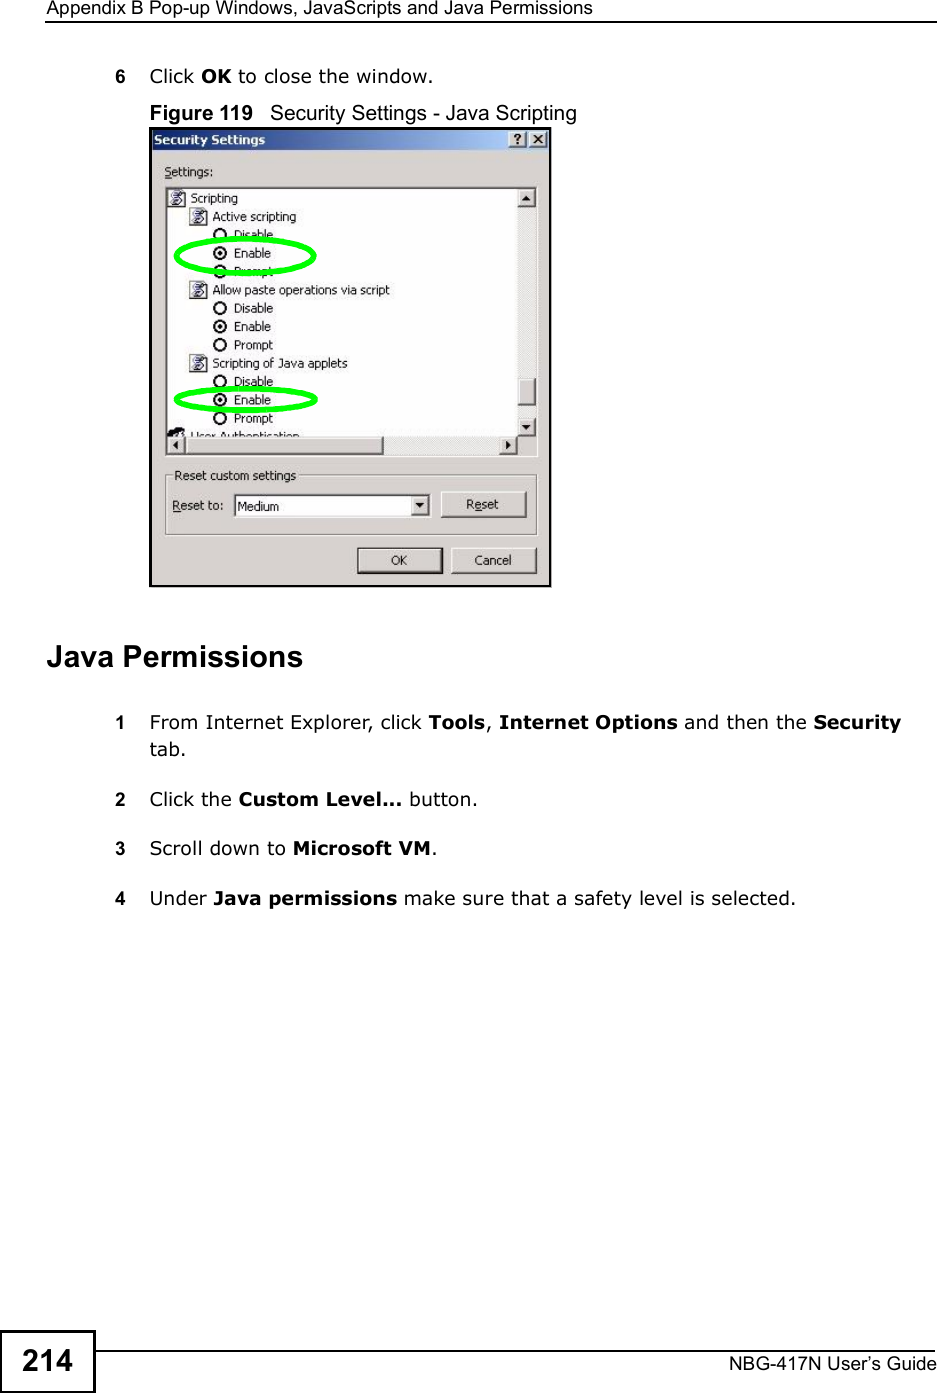 Appendix BPop-up Windows, JavaScripts and Java PermissionsNBG-417N User s Guide2146Click OK to close the window.Figure 119   Security Settings - Java ScriptingJava Permissions1From Internet Explorer, click Tools, Internet Options and then the Security tab. 2Click the Custom Level... button. 3Scroll down to Microsoft VM. 4Under Java permissions make sure that a safety level is selected.